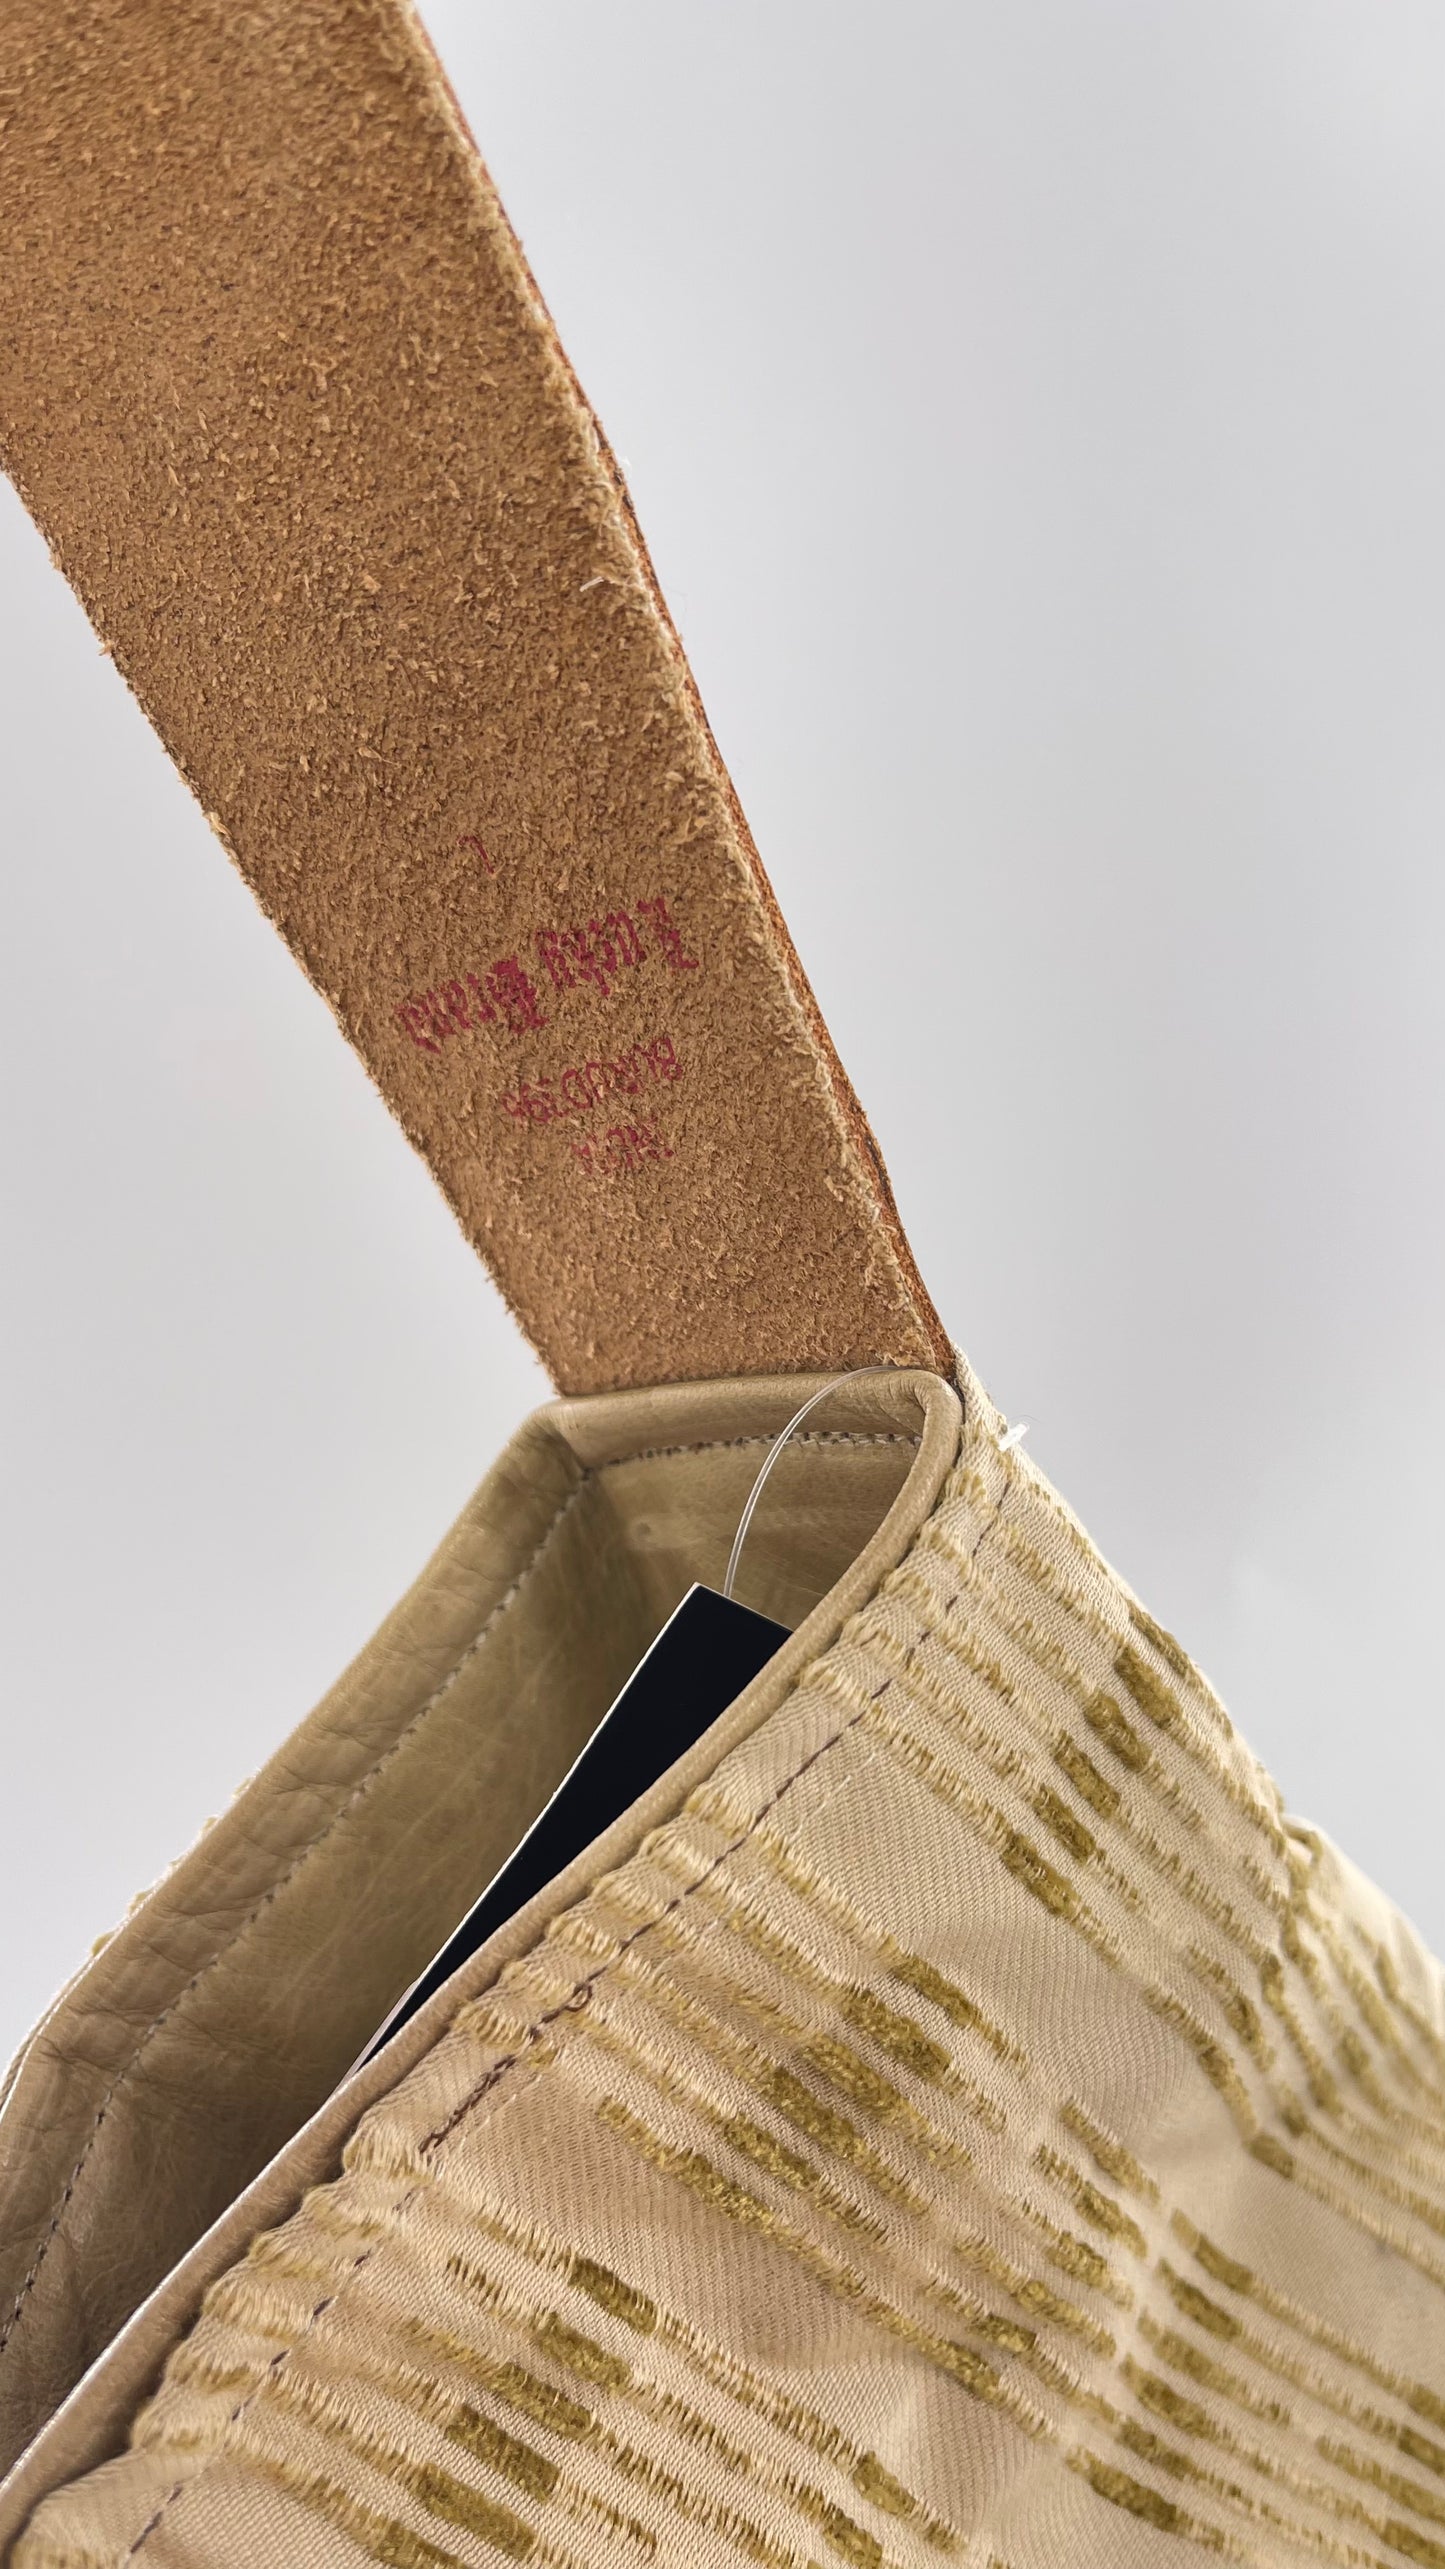 Tote with Embroidered Gold Exterior, Embroidered Leather Strap and Leather Interior - Shown Reversed